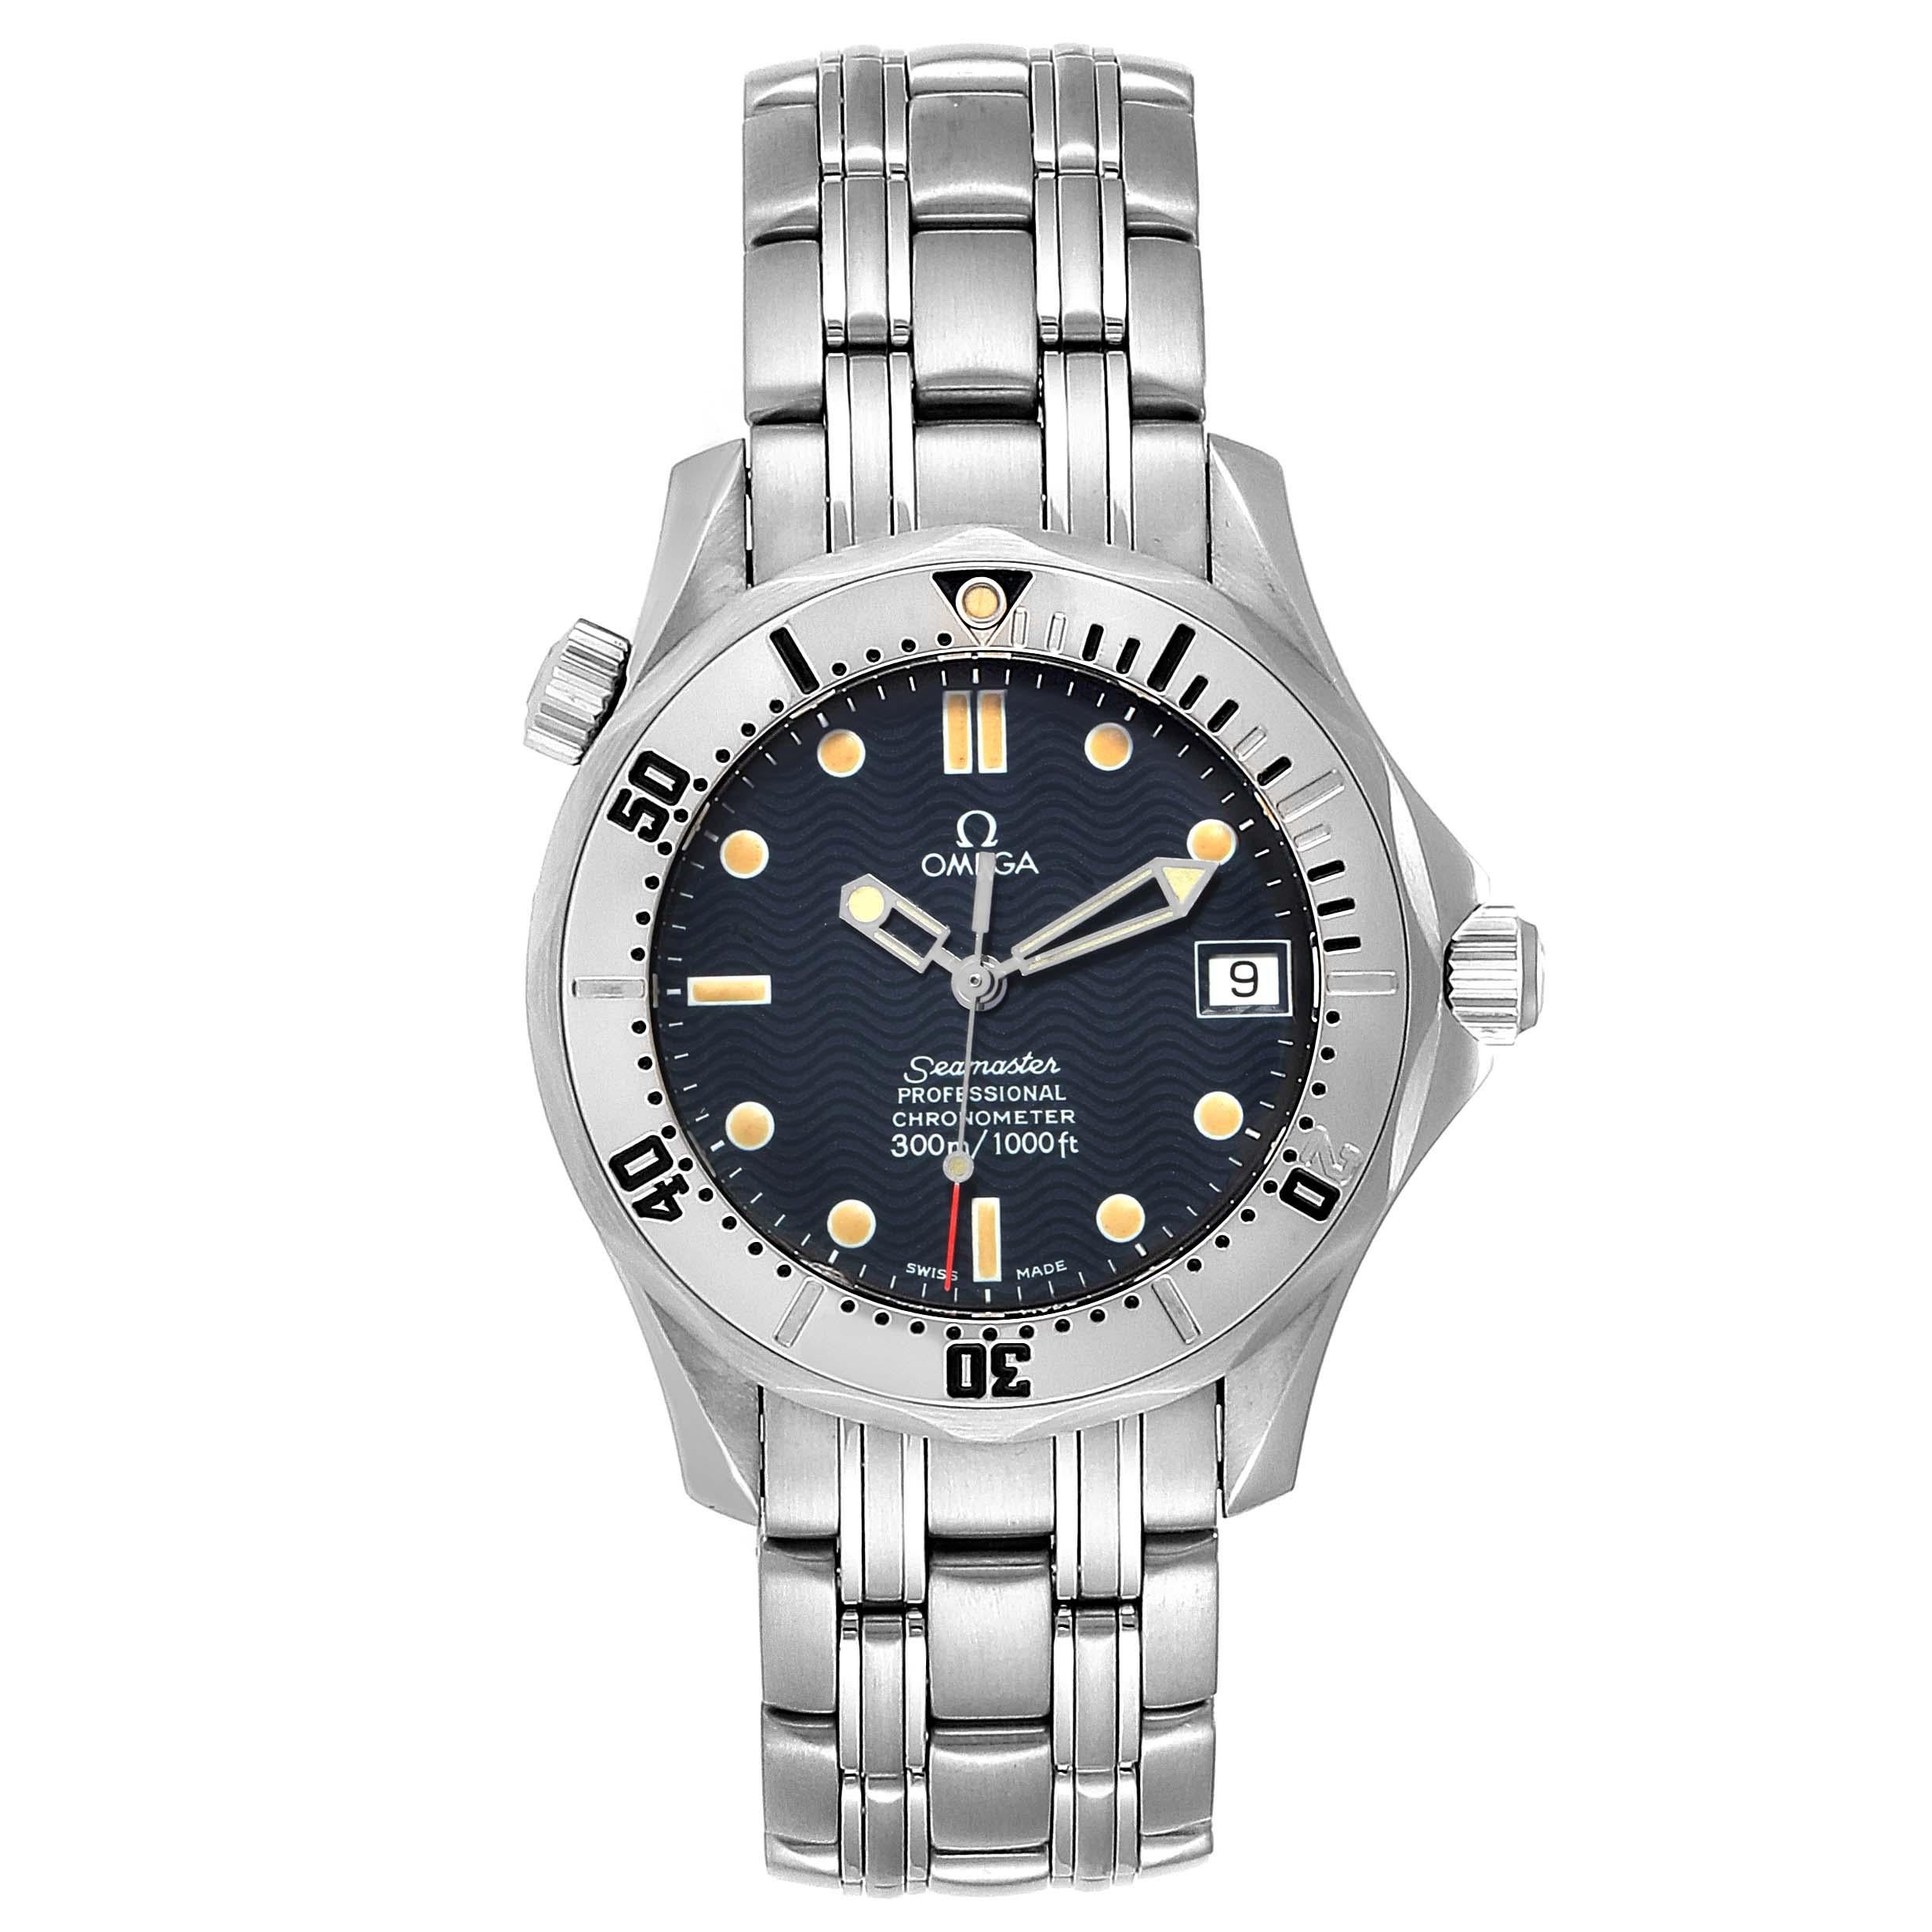 Omega Seamaster Midsize 36 Blue Dial Automatic Steel Watch 2552.80.00. Automatic self-winding movement. Stainless steel case 36.25 mm in diameter. Omega logo on a crown. Stainless steel unidirectional rottating bezel. Scratch resistant sapphire